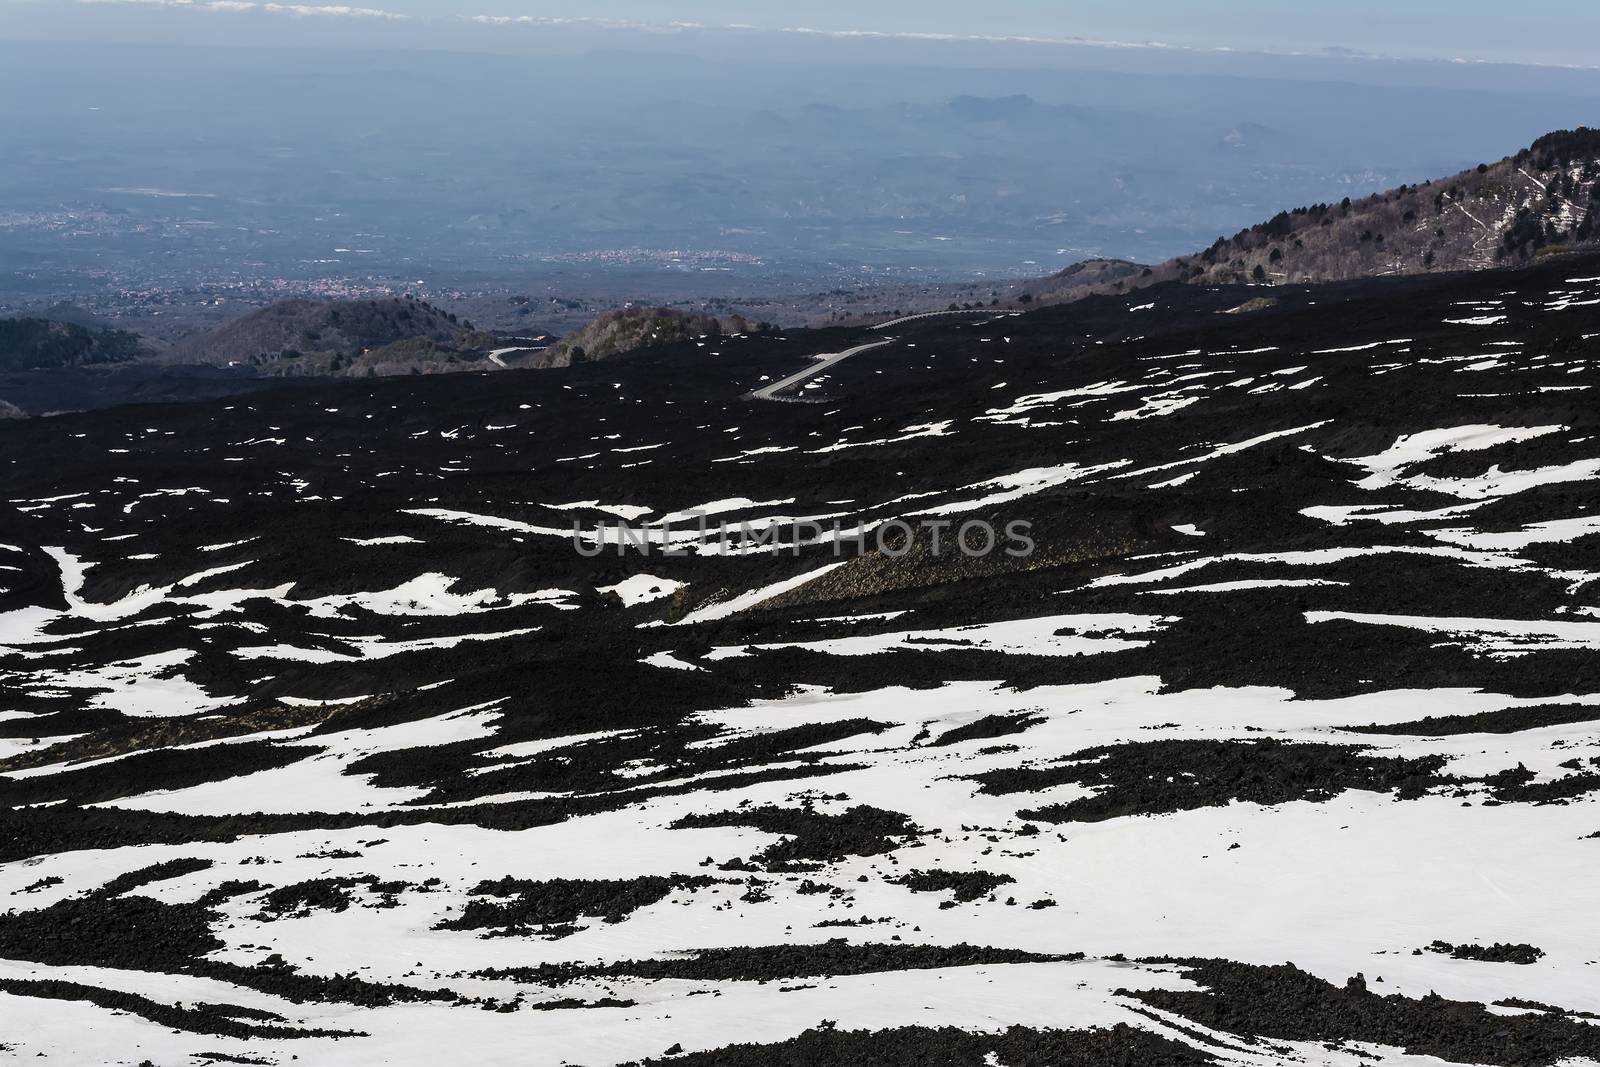 Etna mountain landscape, volcanic rock and snow, Sicily, Italy